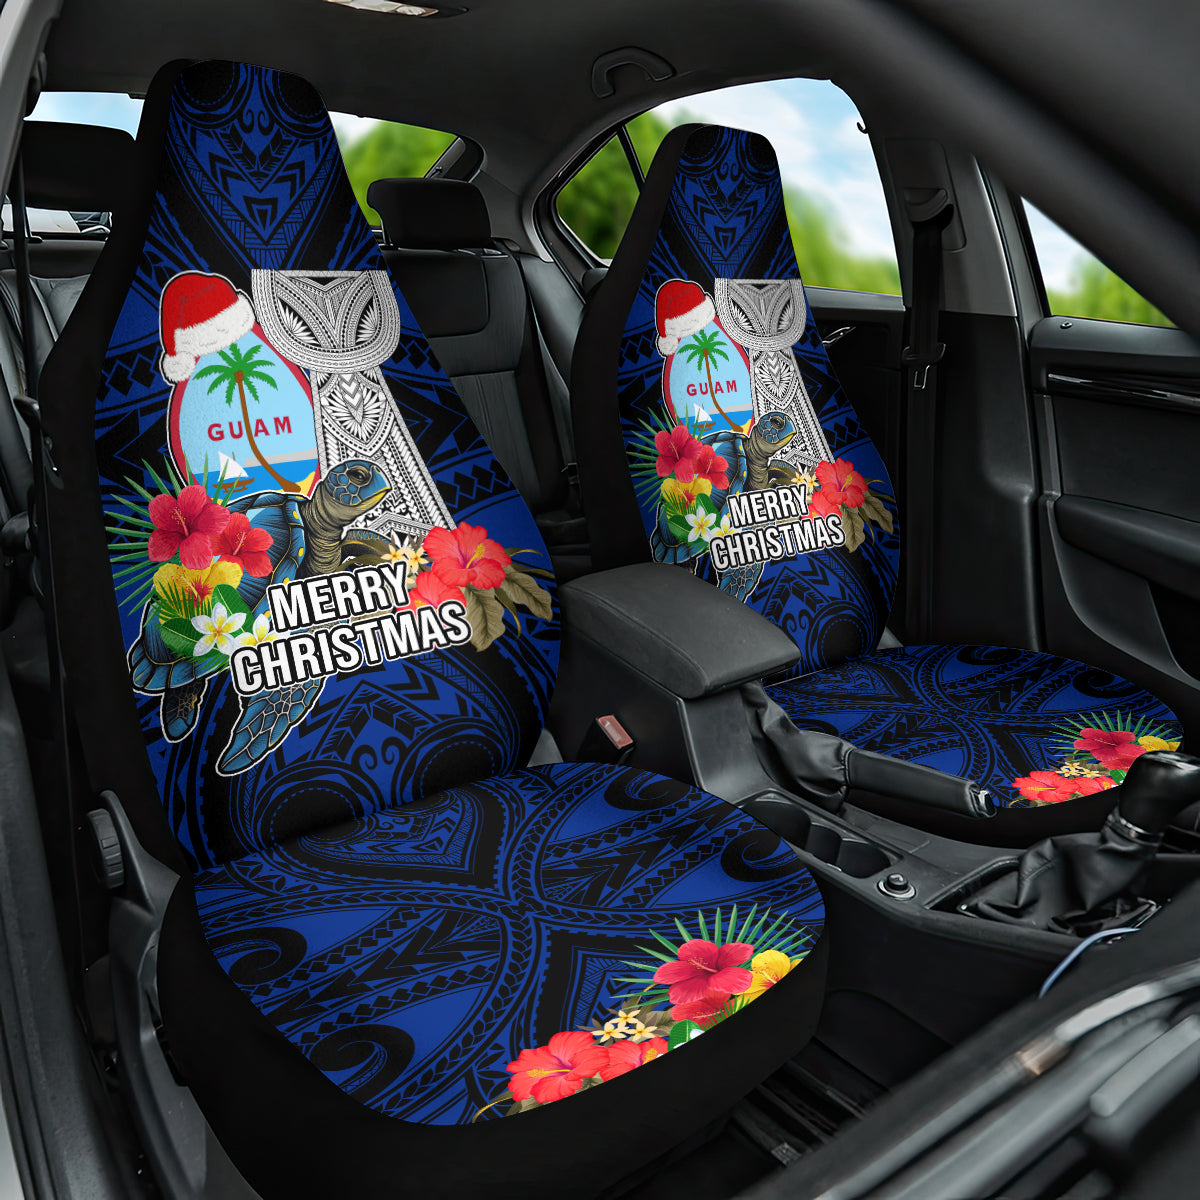 Guam Christmas Car Seat Cover Santa Gift Latte Stone and Sea Turle Mix Hibiscus Chamorro Blue Style LT03